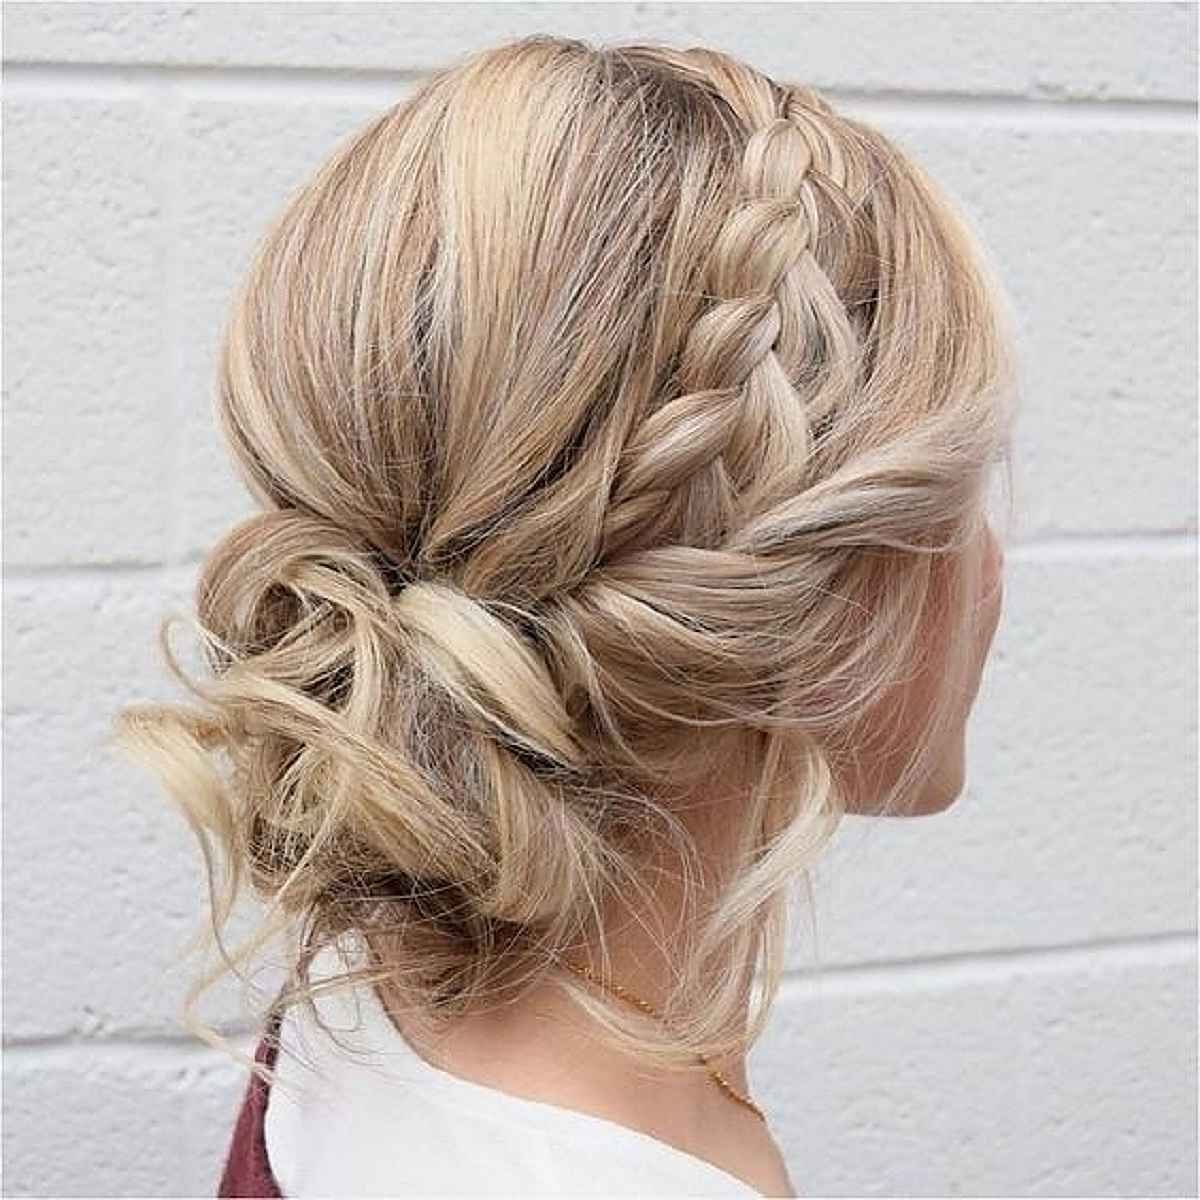 20 Romantic Bun Hairstyles For Prom That Are Easy To Do Regarding Best And Newest Undone Side Braid And Bun Upstyle (View 12 of 15)